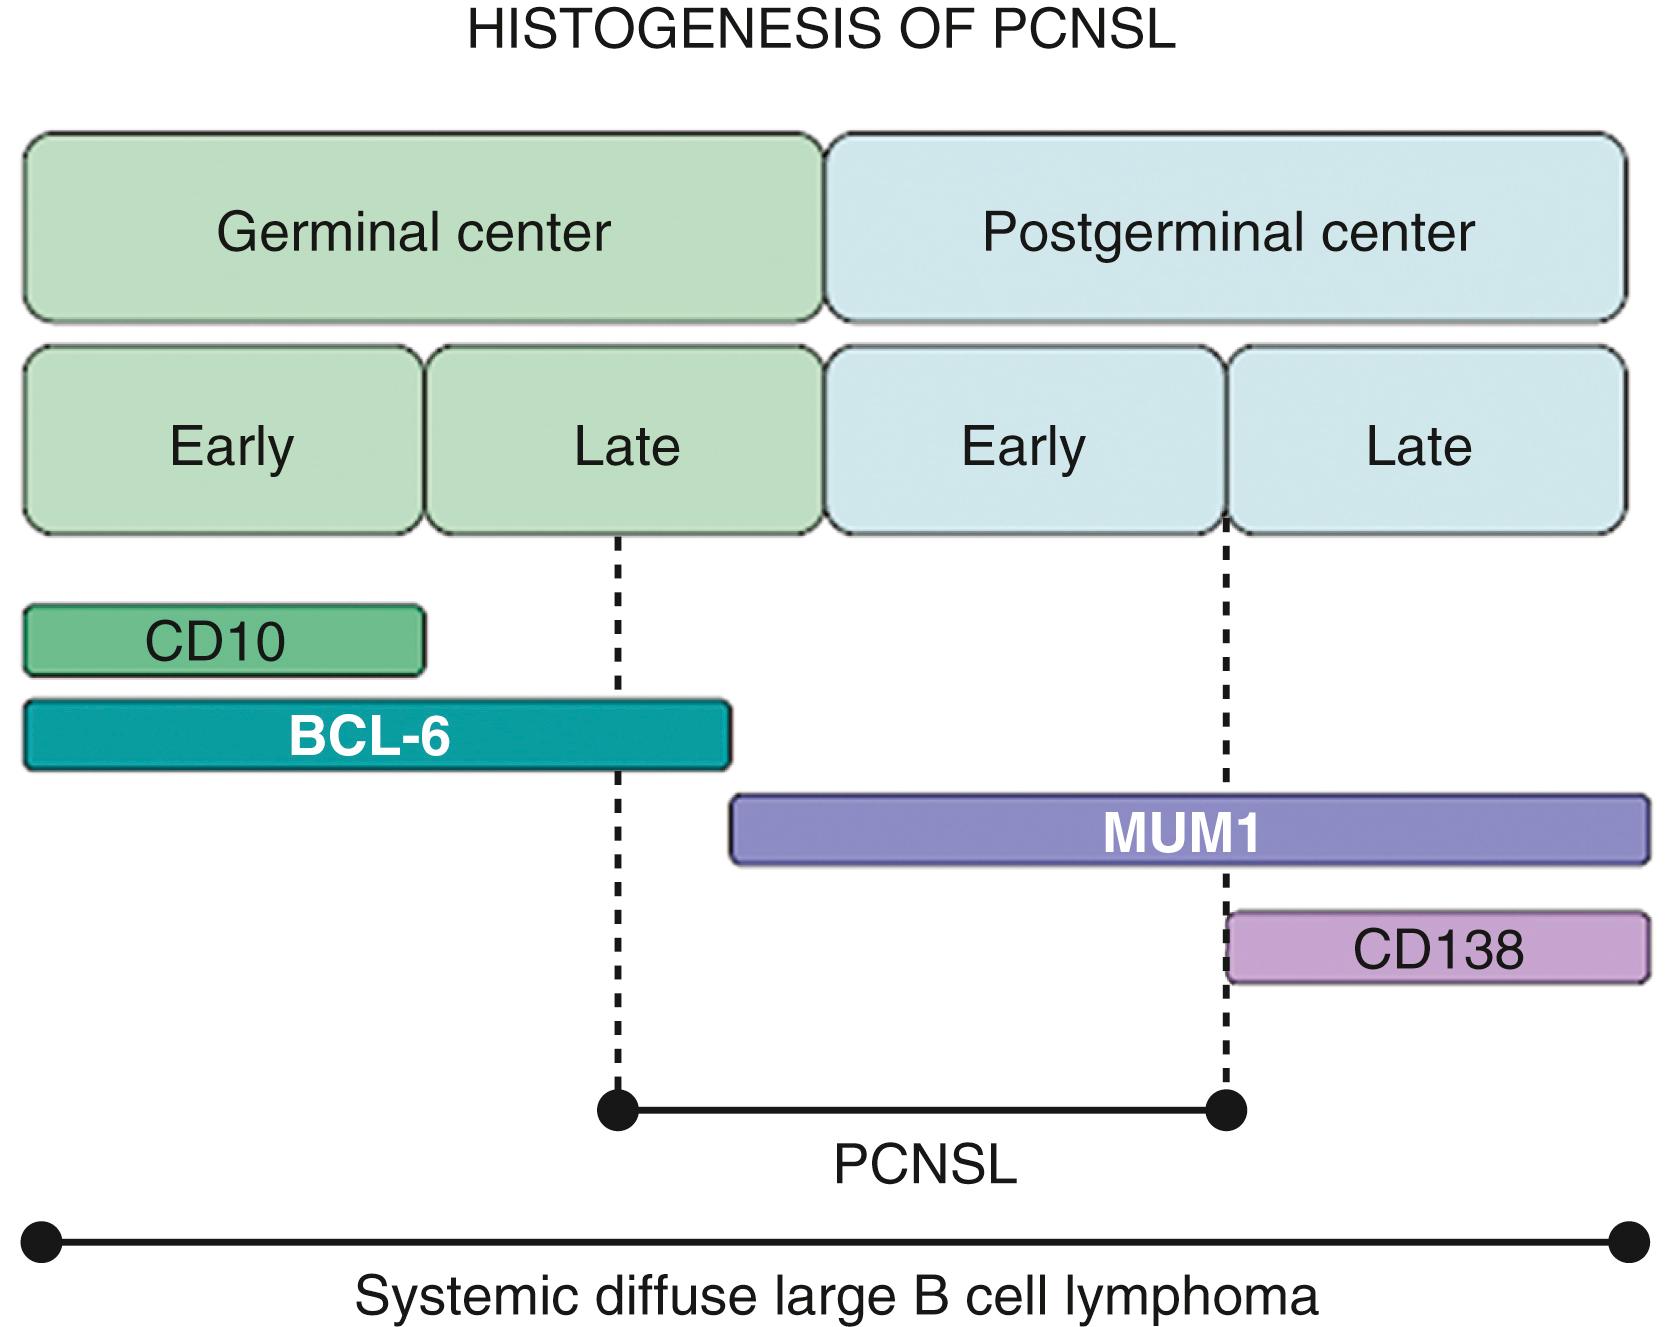 FIGURE 9.1, A model for the histogenesis of primary central nervous system lymphoma (PCNSL) based on the developmental stage of B-cell arrest as indicated by antigen expression.